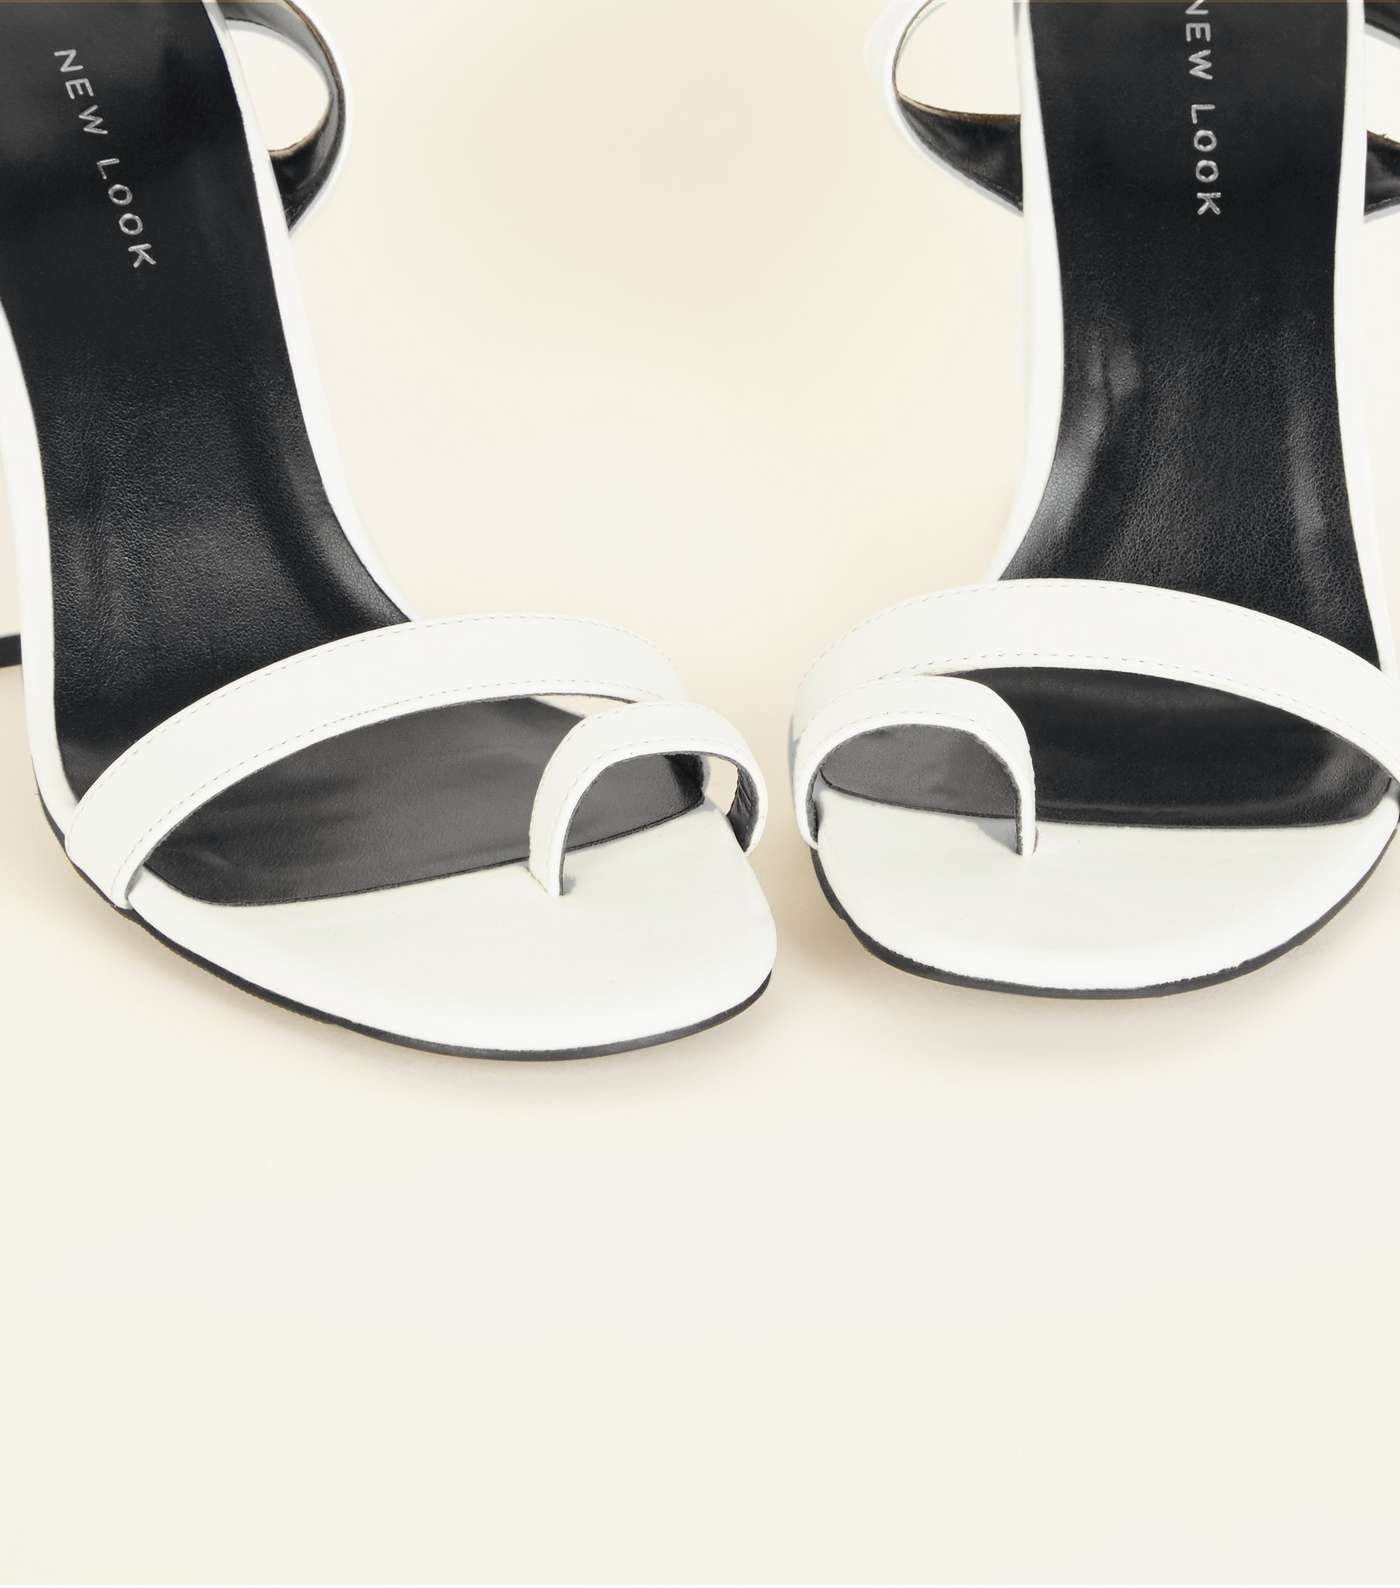 Off White Leather-Look Toe Strap Heeled Sandals  Image 4